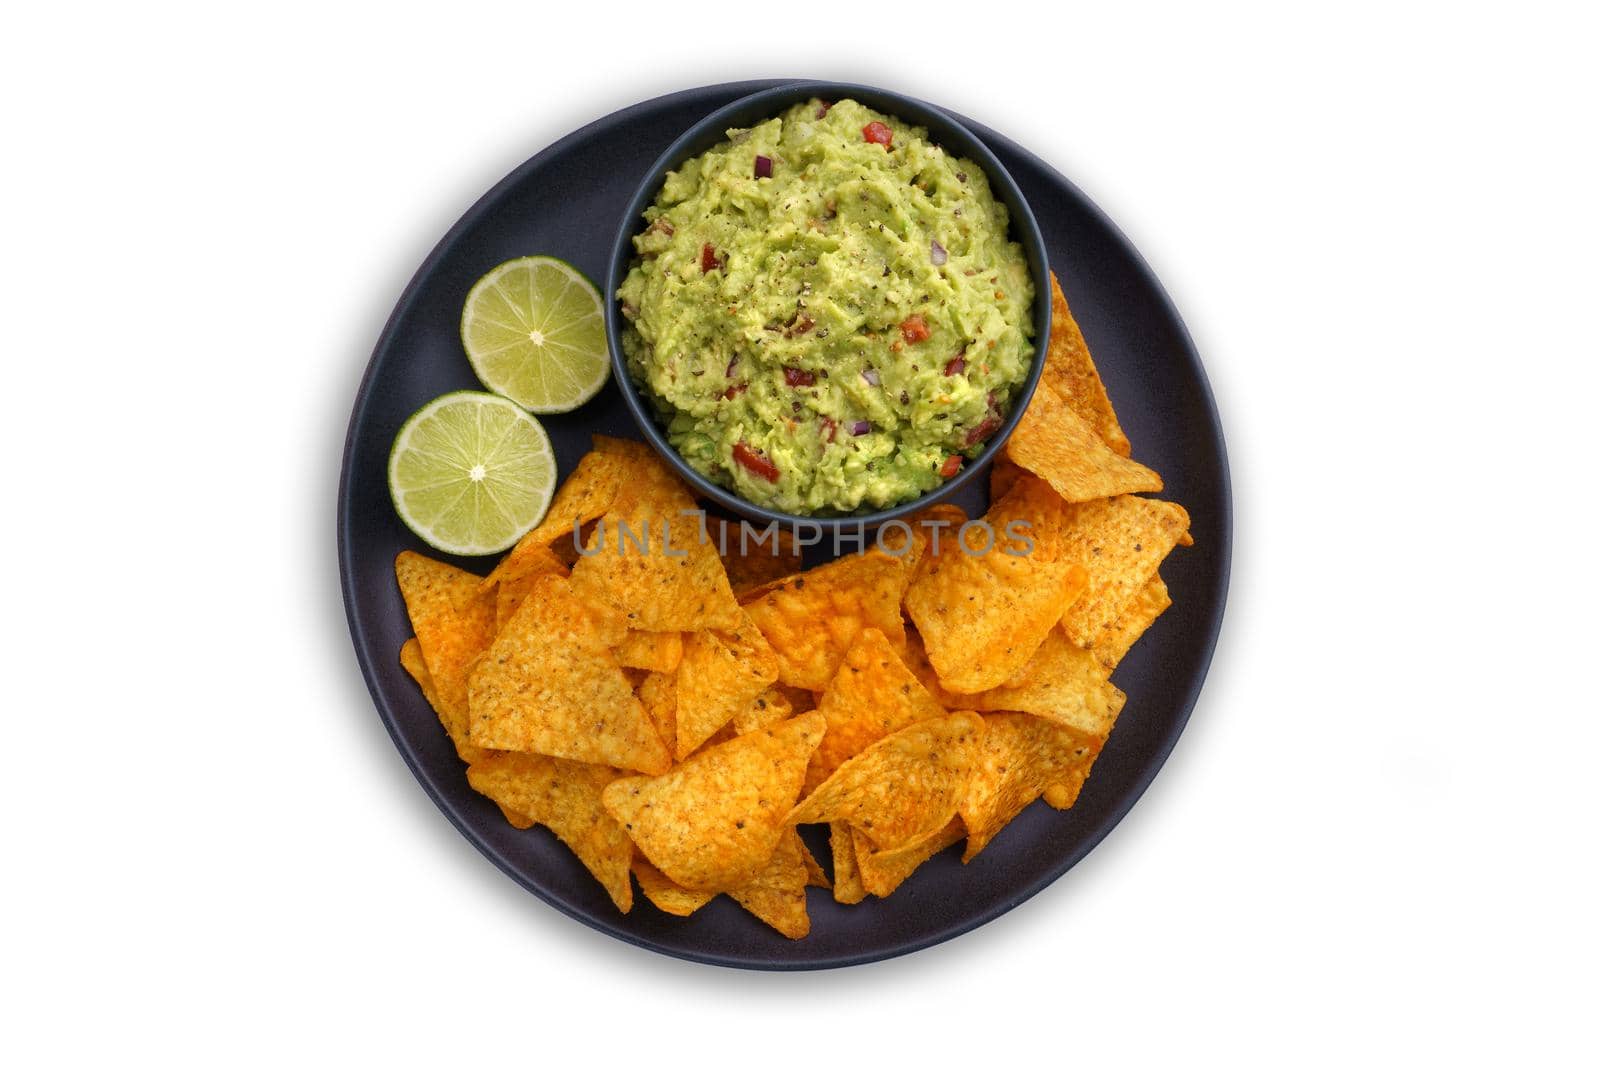 Top view of guacamole dip in black plate with tortilla chips or nachos isolated on a white background. High quality photo